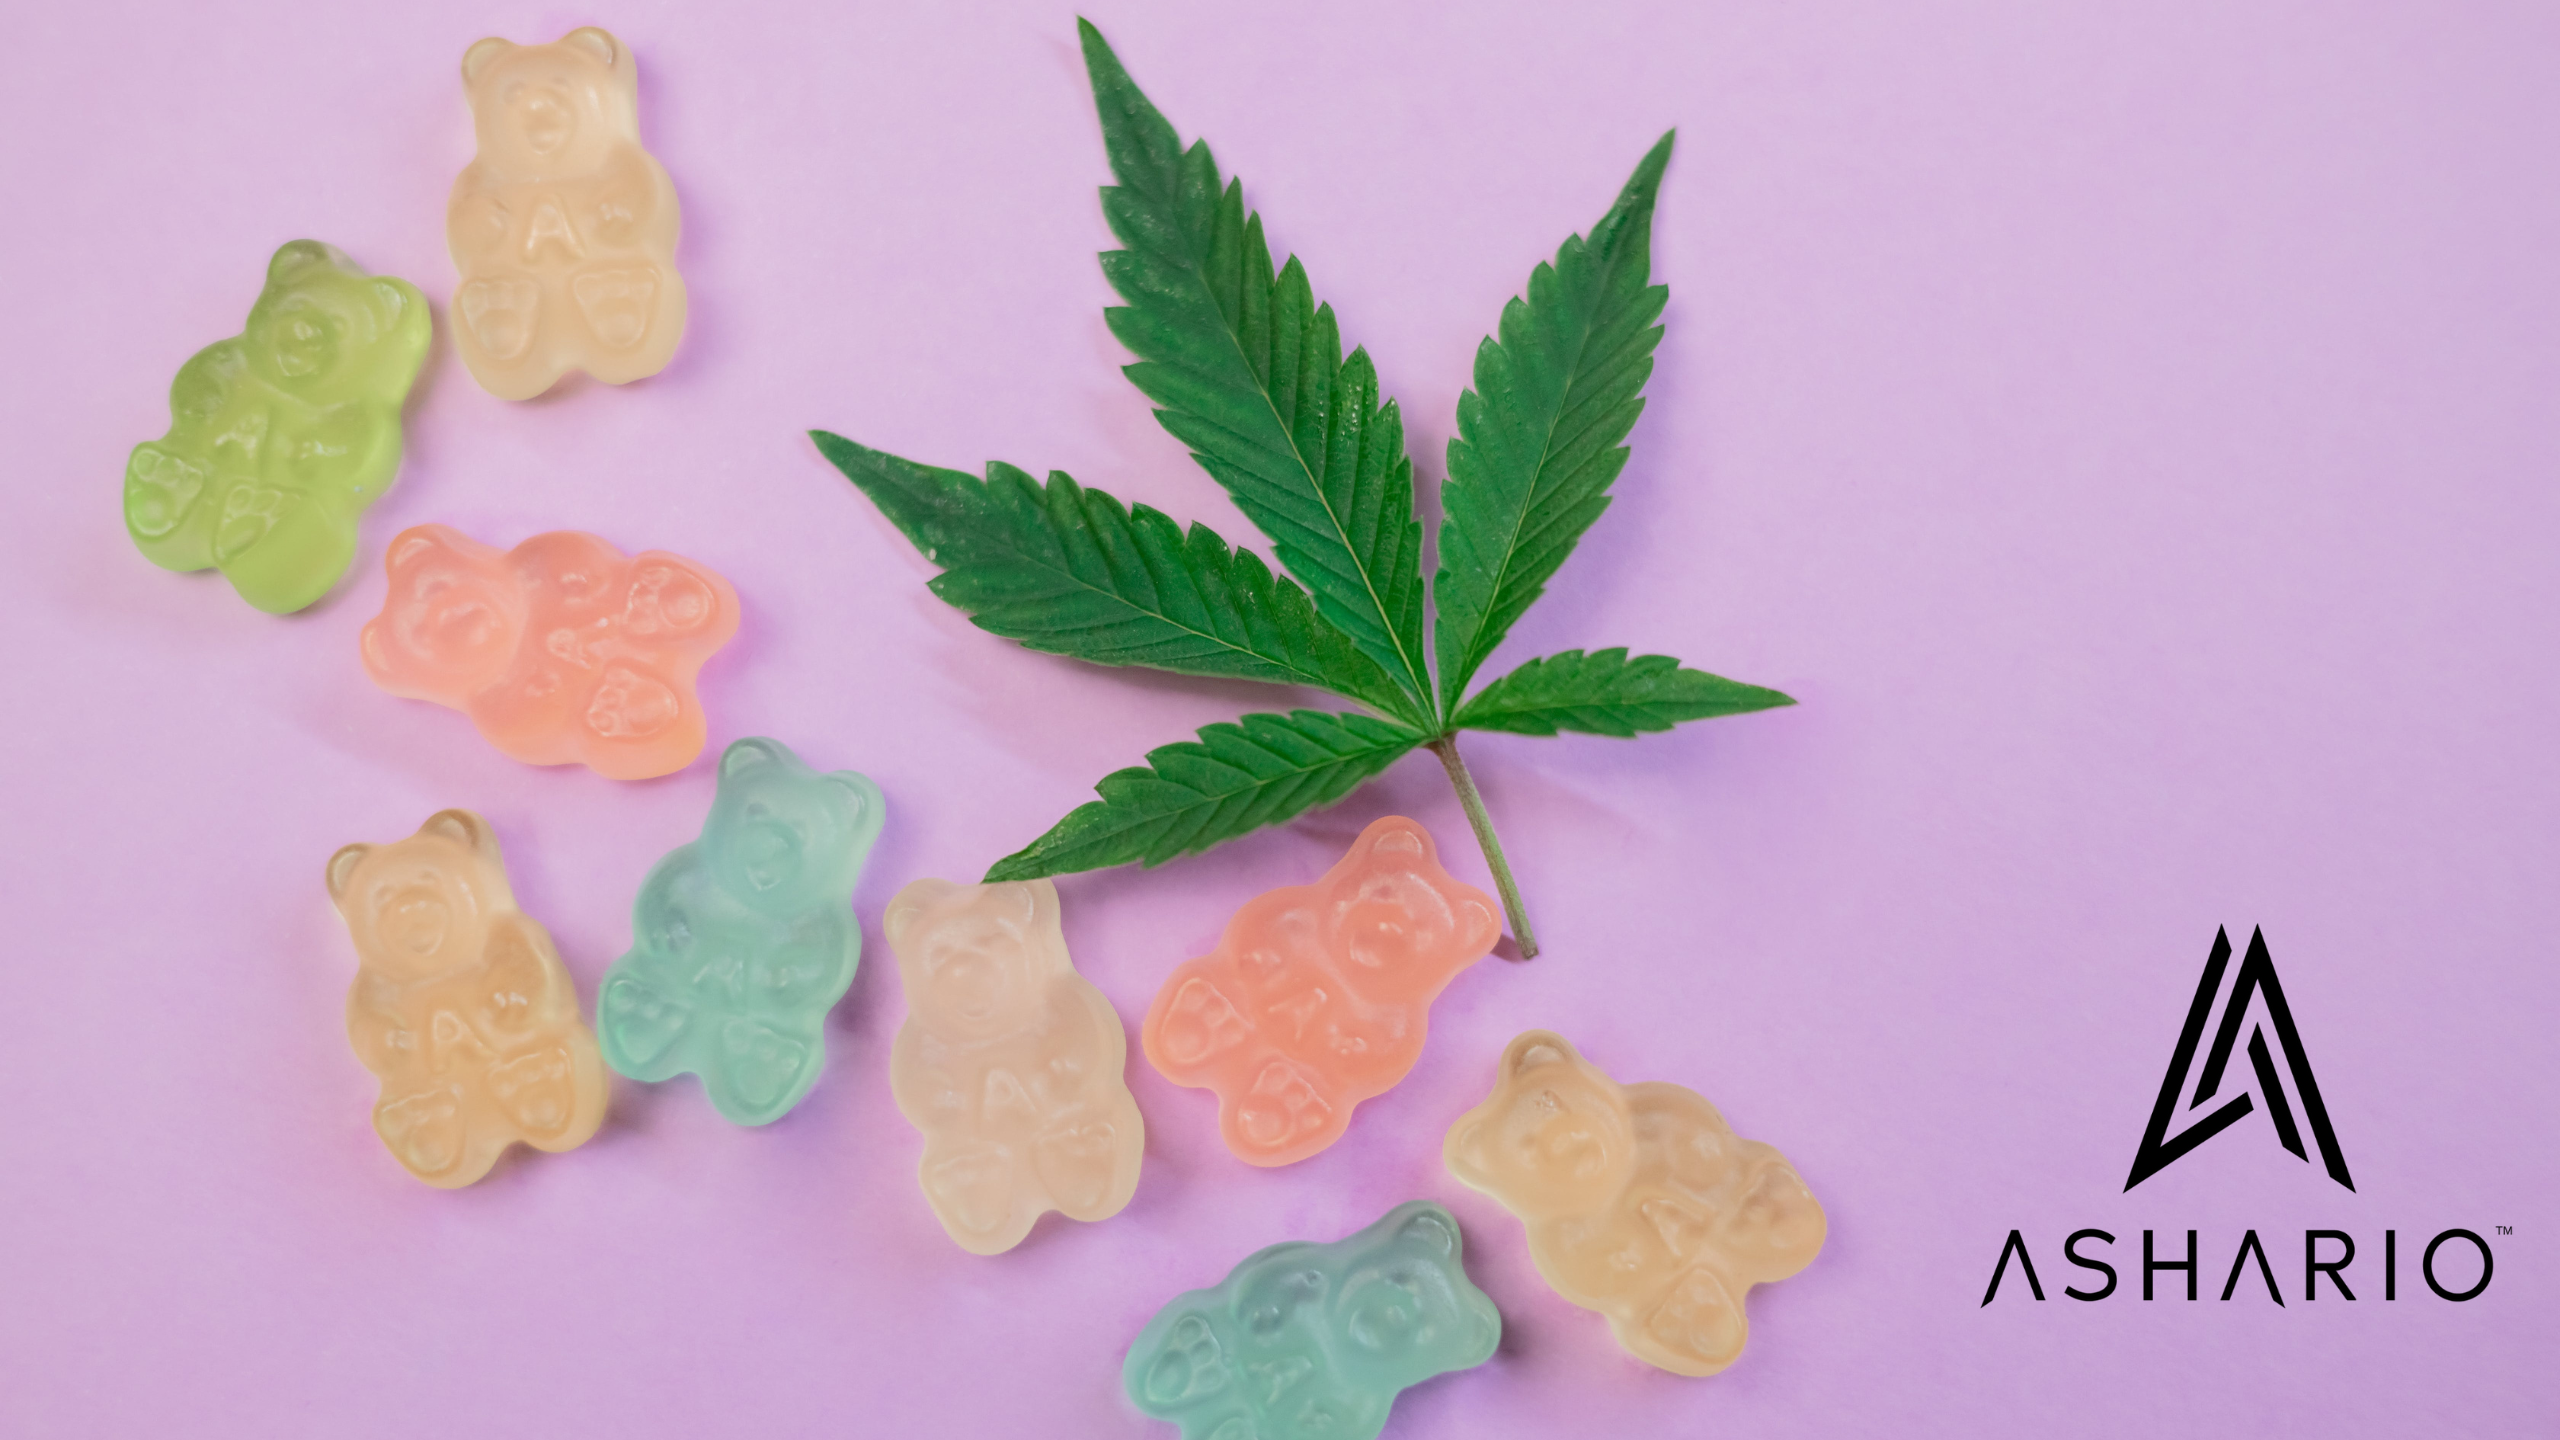 Indulge in the ultimate cannabis experience with Ashario Cannabis' Limited Edition High-Potency THC Edibles.